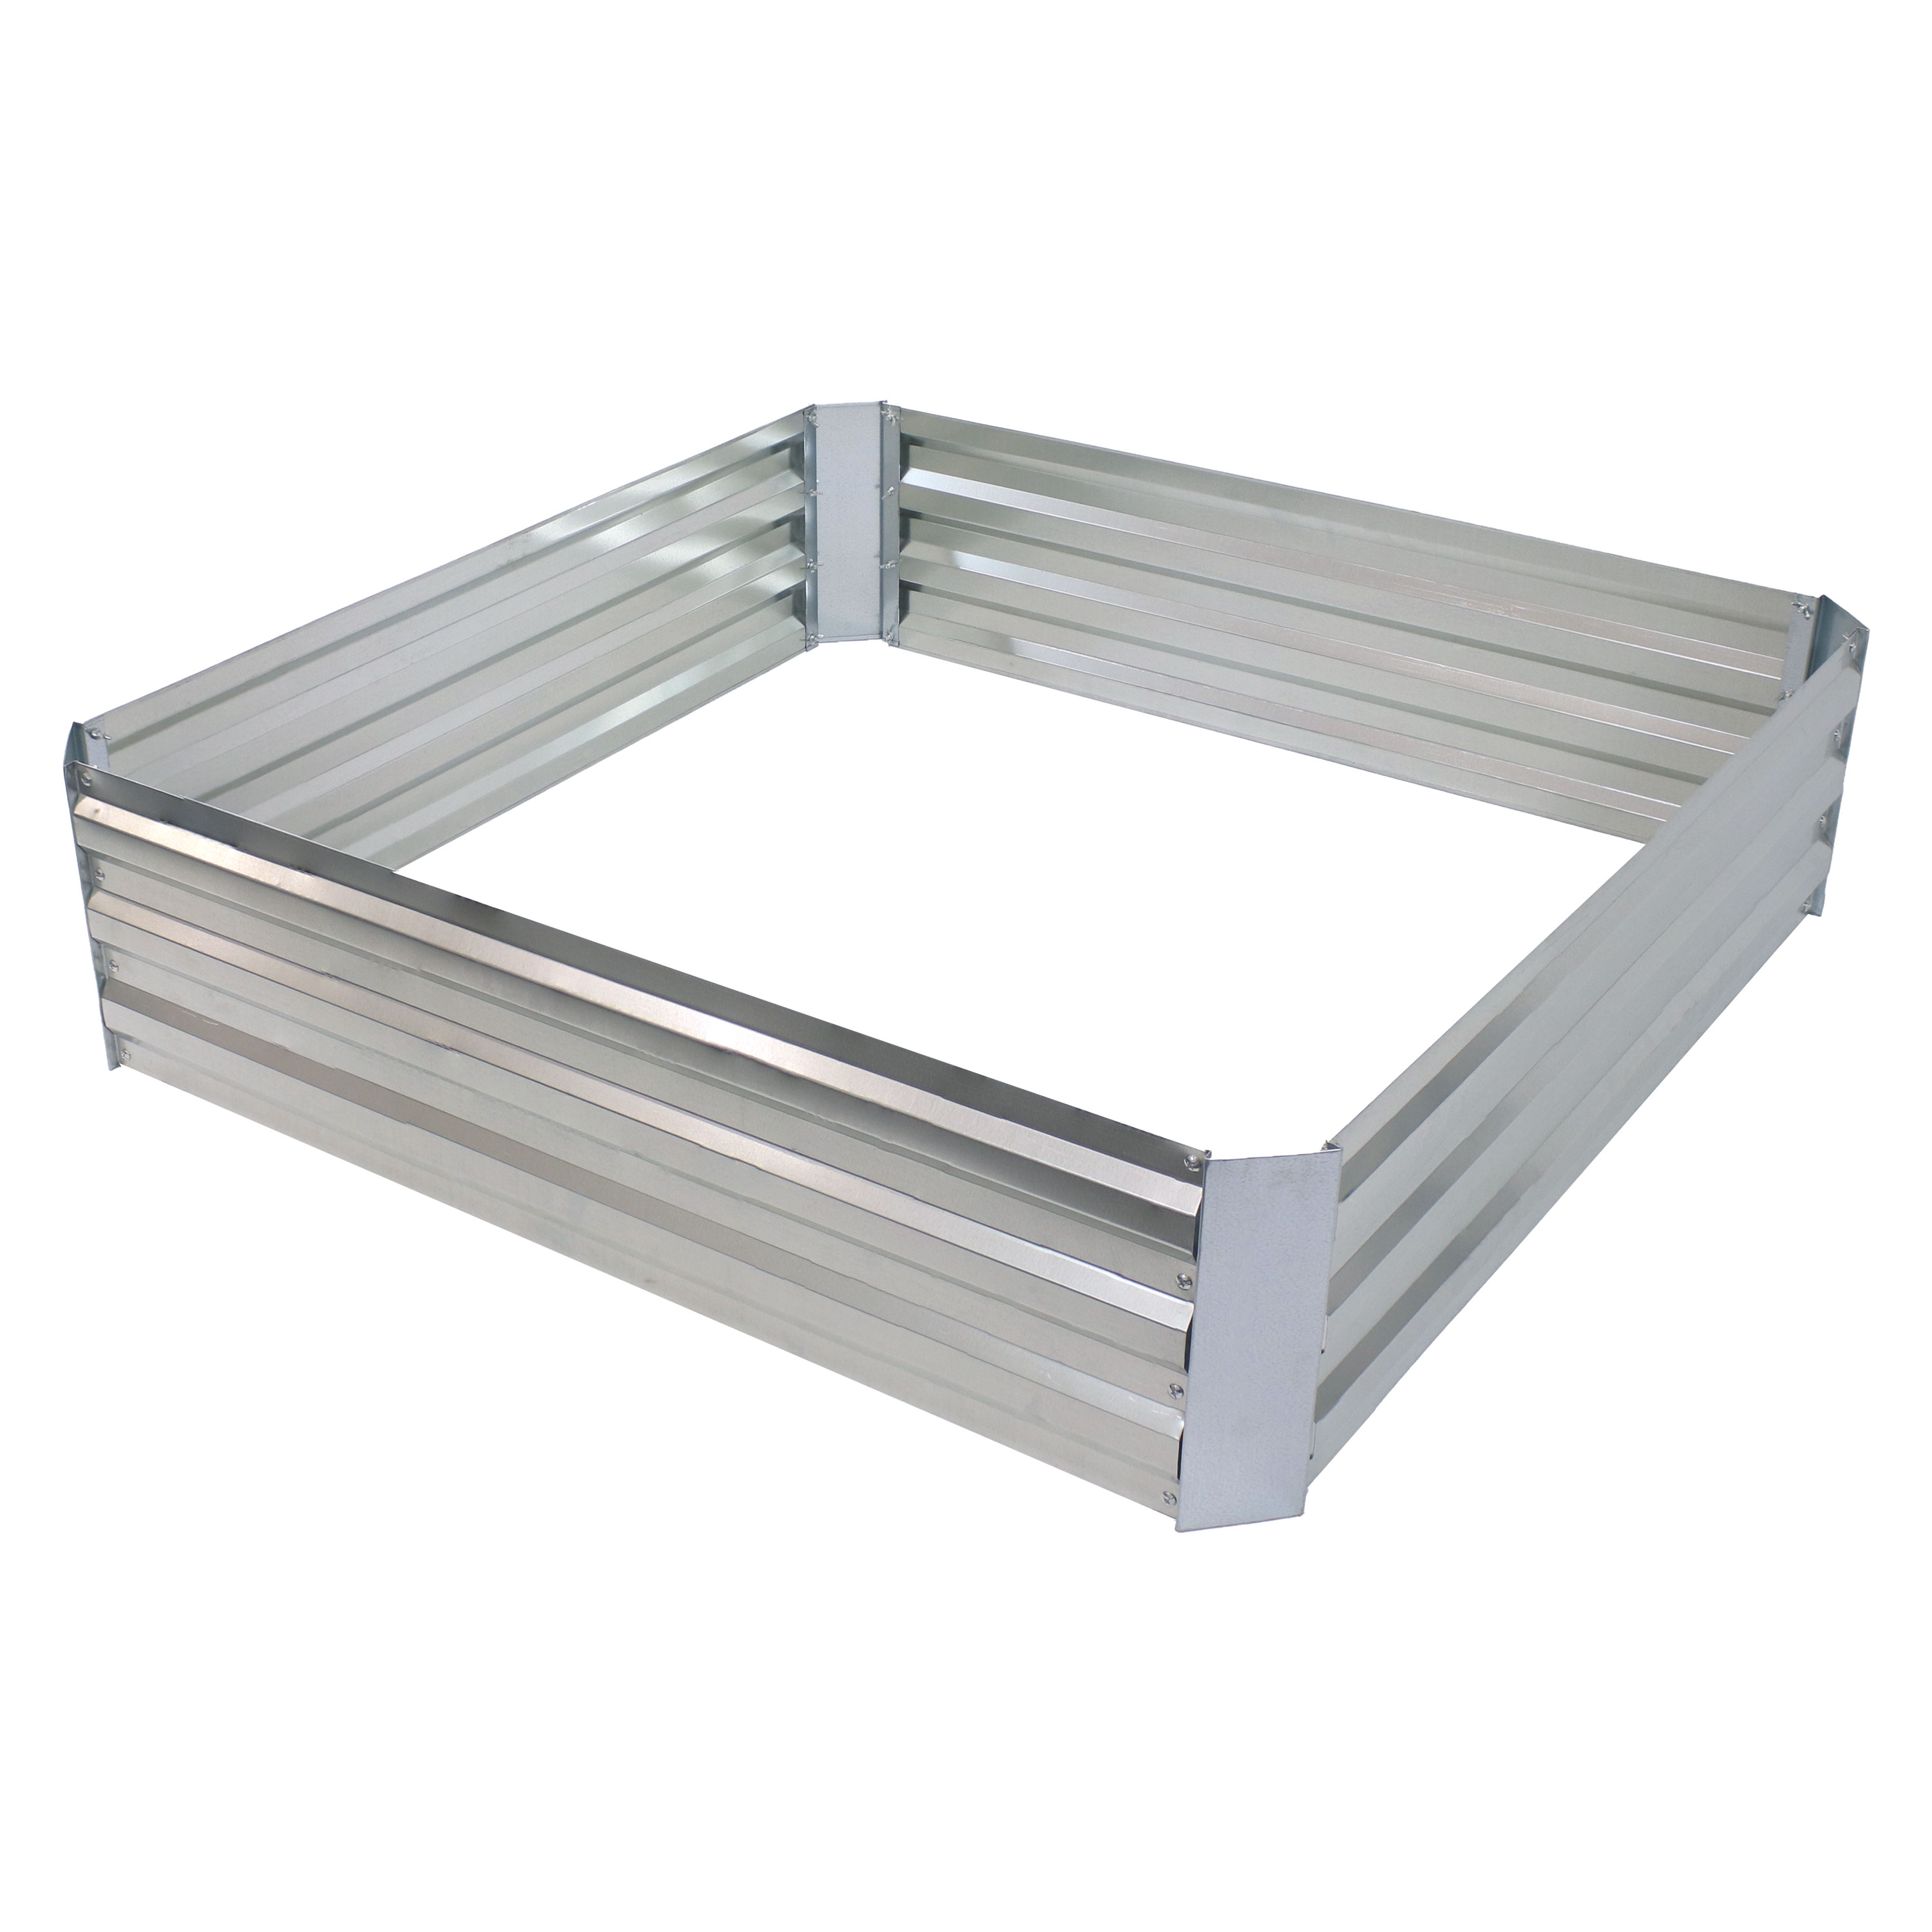 Square Steel Raised Planter Bed - 4 x 4 ft - Silver